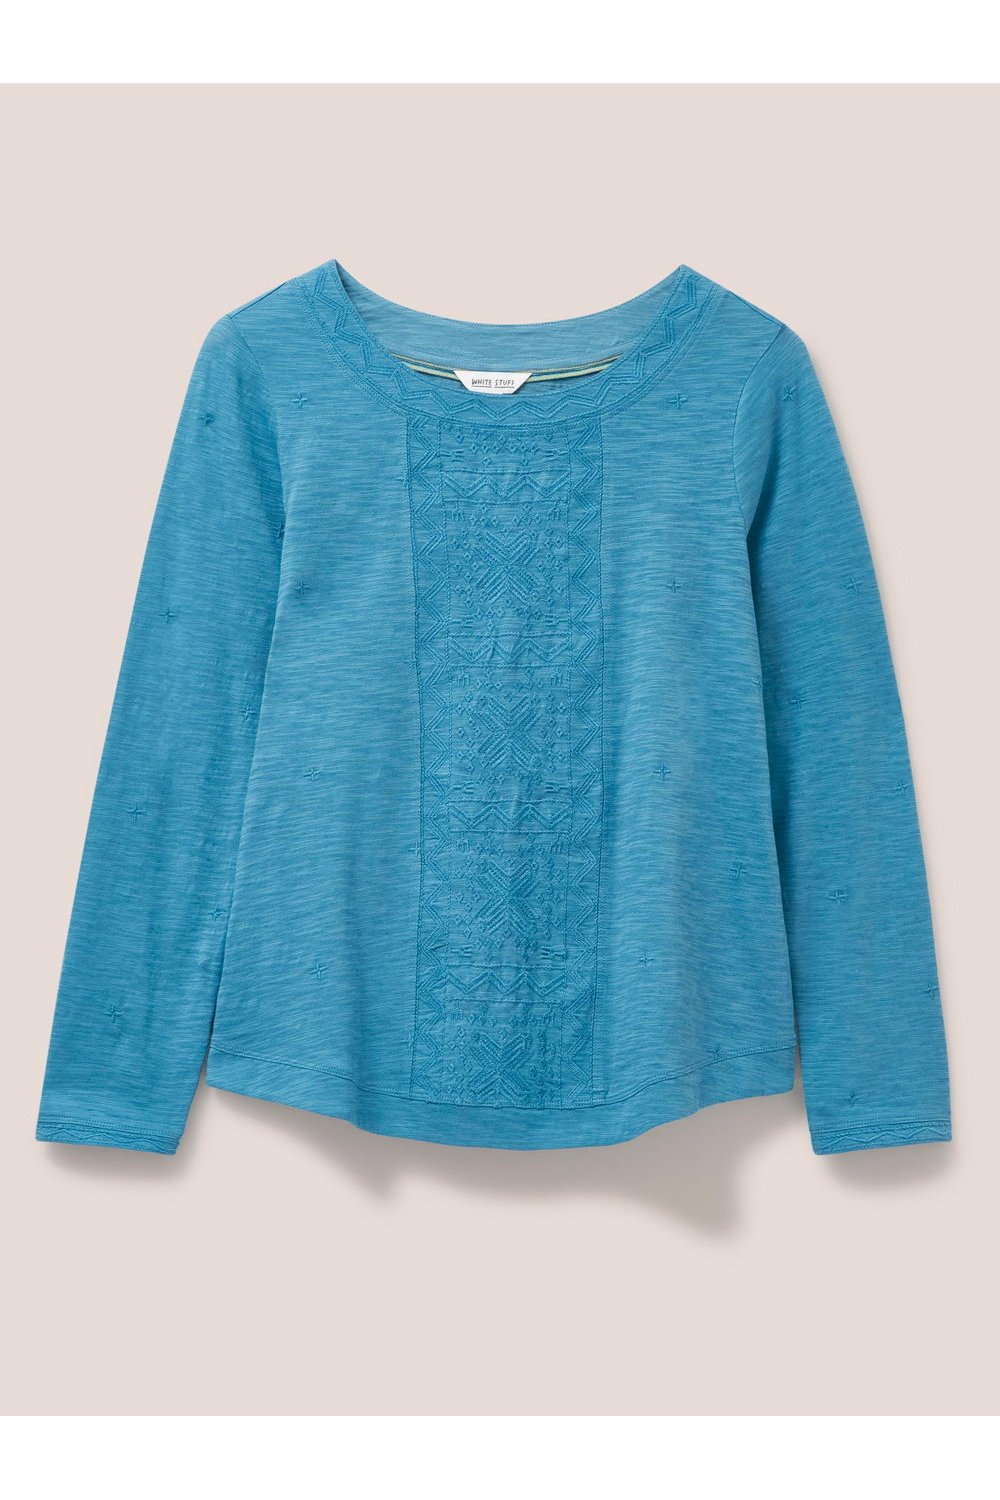 White Stuff LONG SLEEVE EMBROIDERED WEAVER in DK BLUE